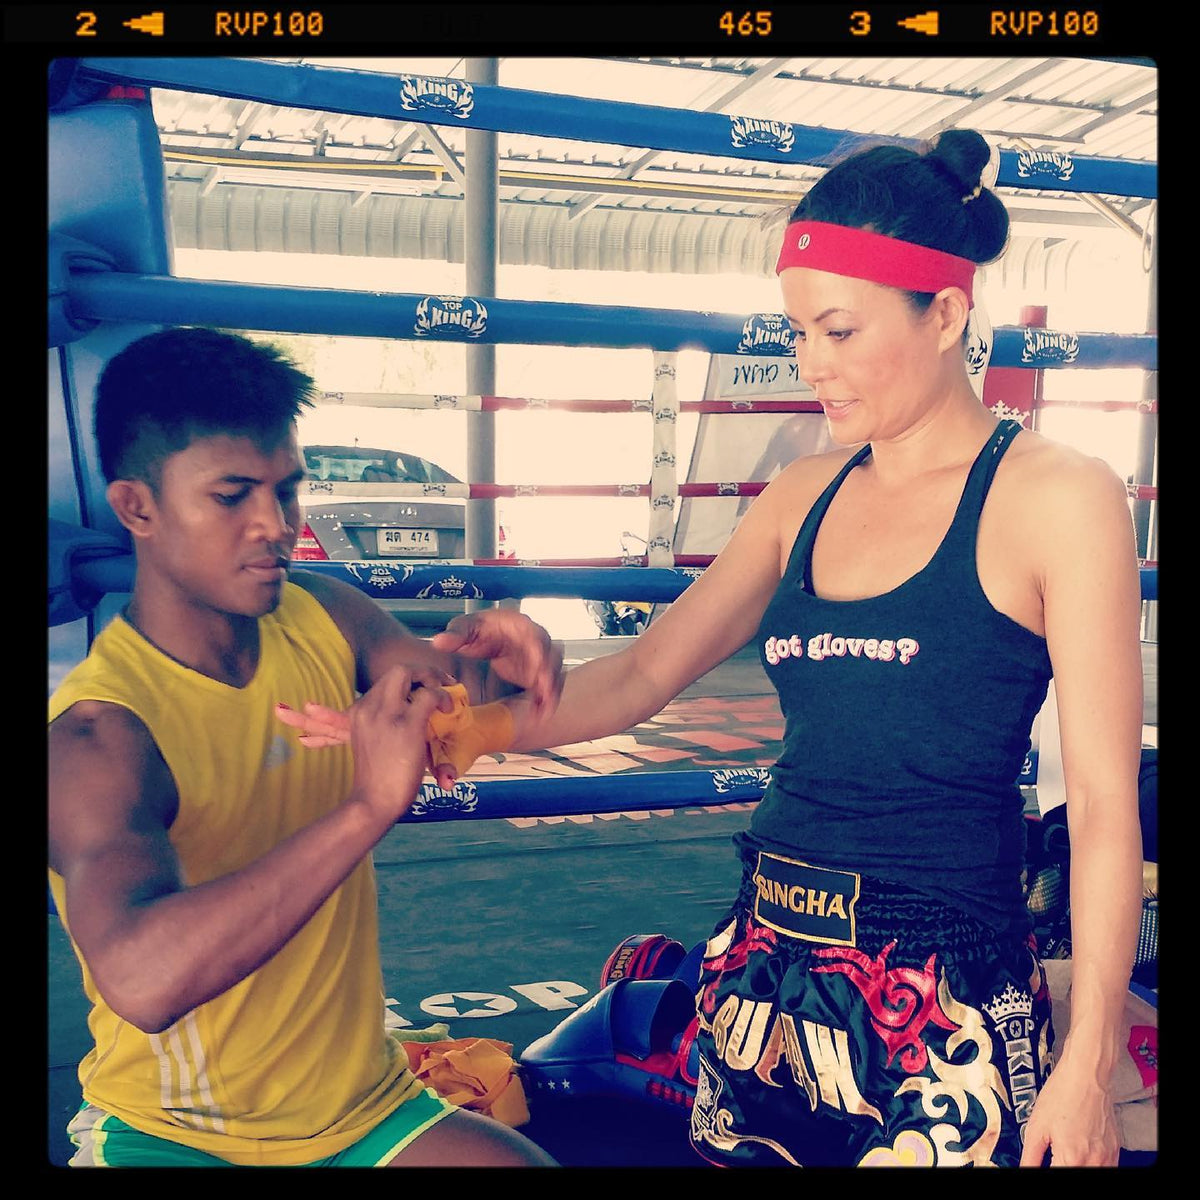 Muay Thai Fighting Styles and Becoming a Complete Fighter 